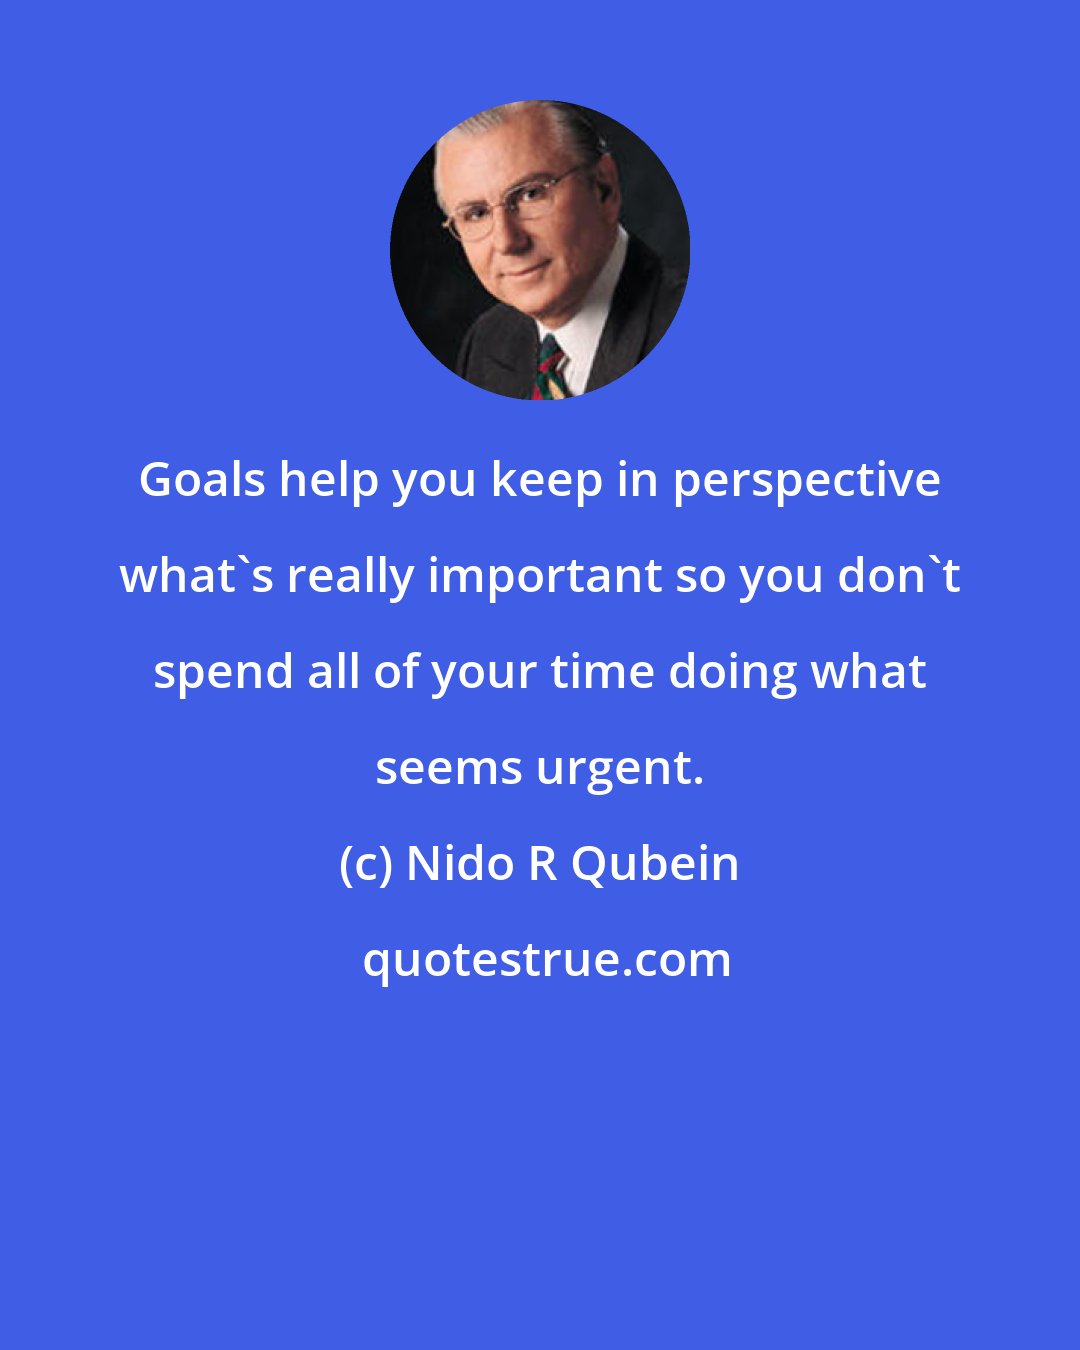 Nido R Qubein: Goals help you keep in perspective what's really important so you don't spend all of your time doing what seems urgent.